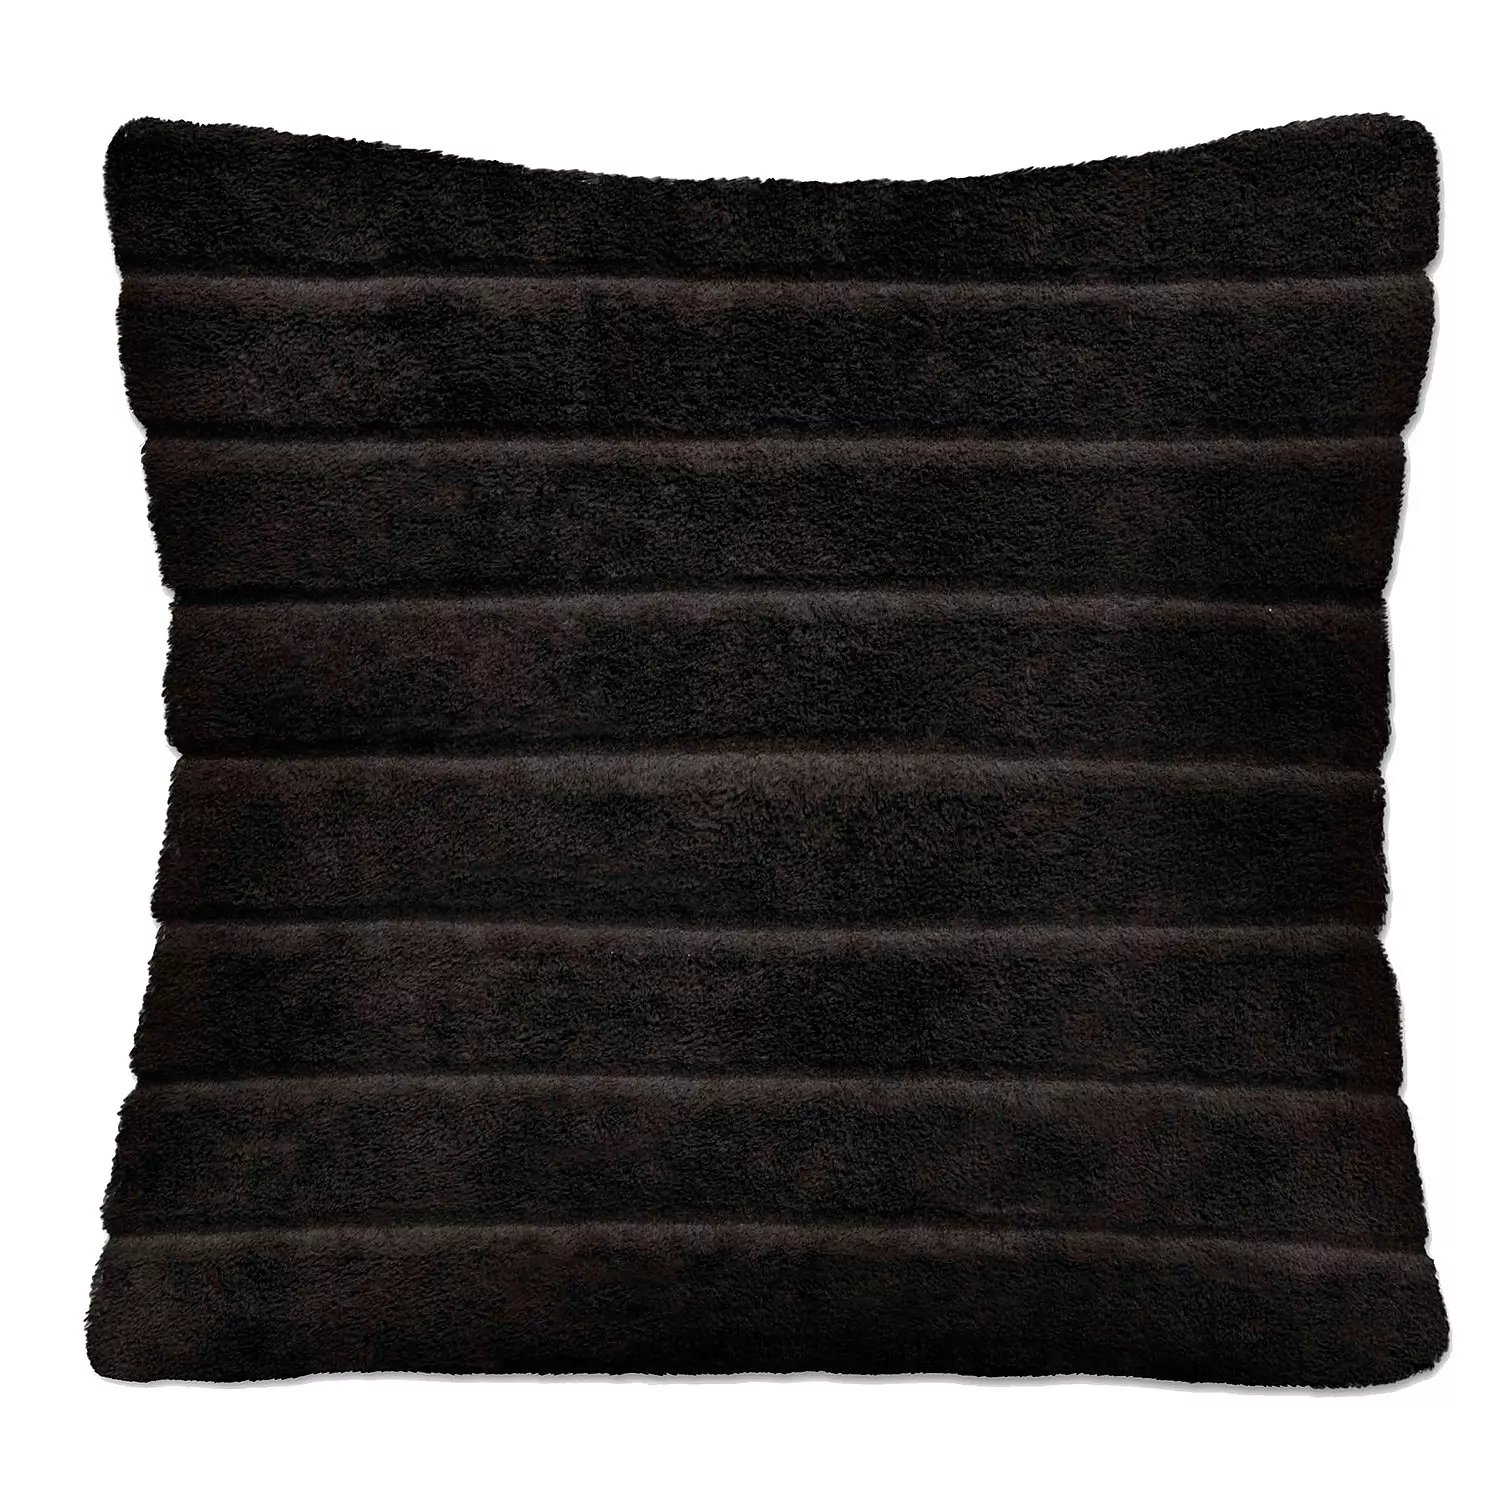 Faux fur decorative cushion with embossed stripes, 17"x17", black